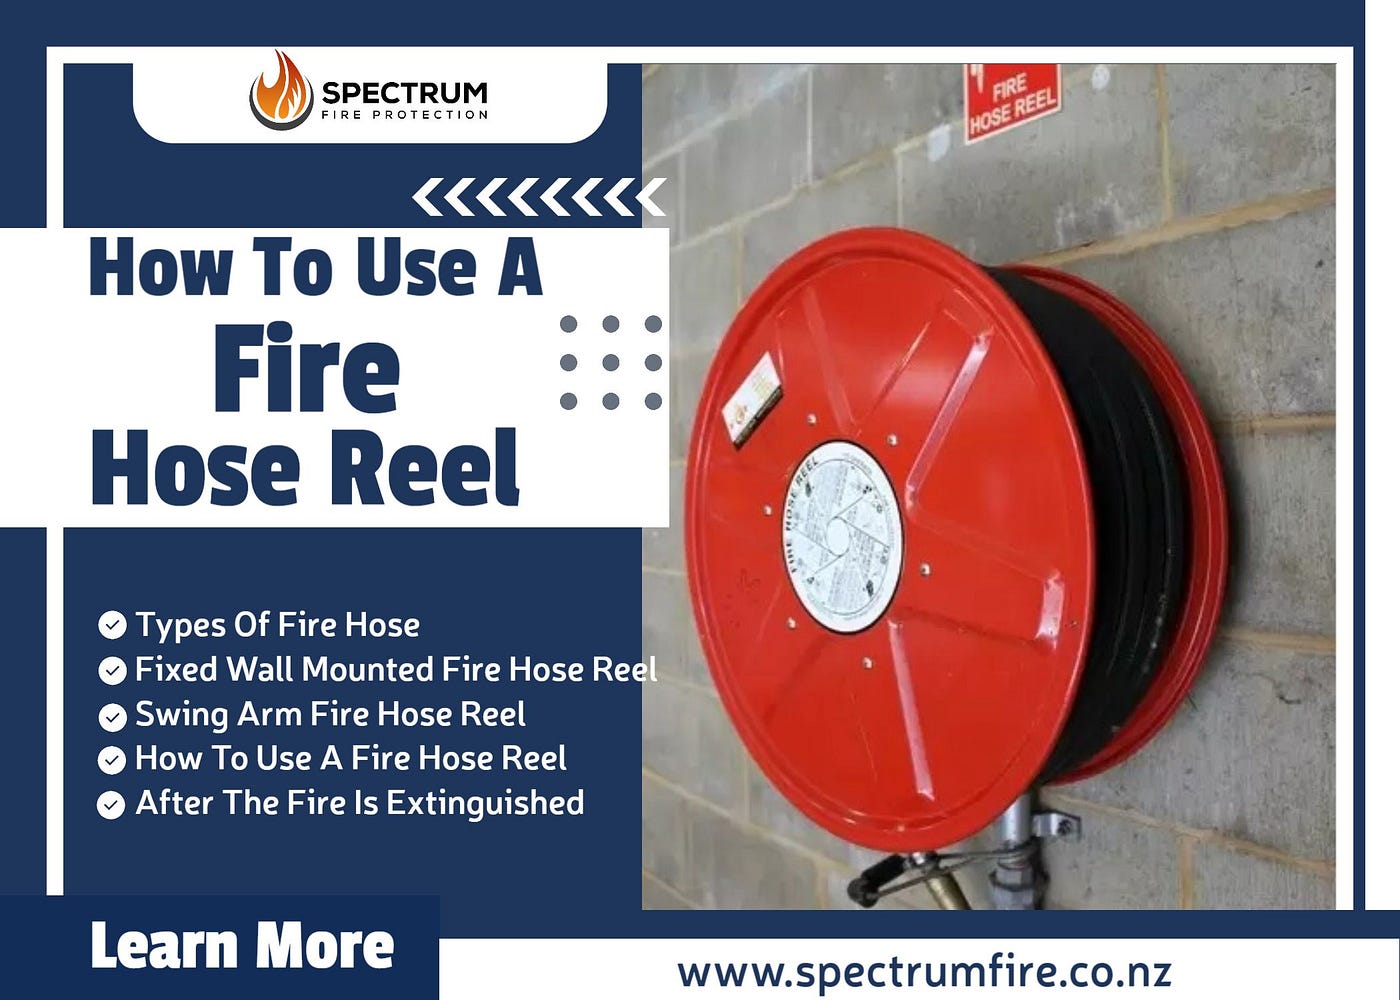 How To Use A Fire Hose Reel, Spectrum Fire Protection